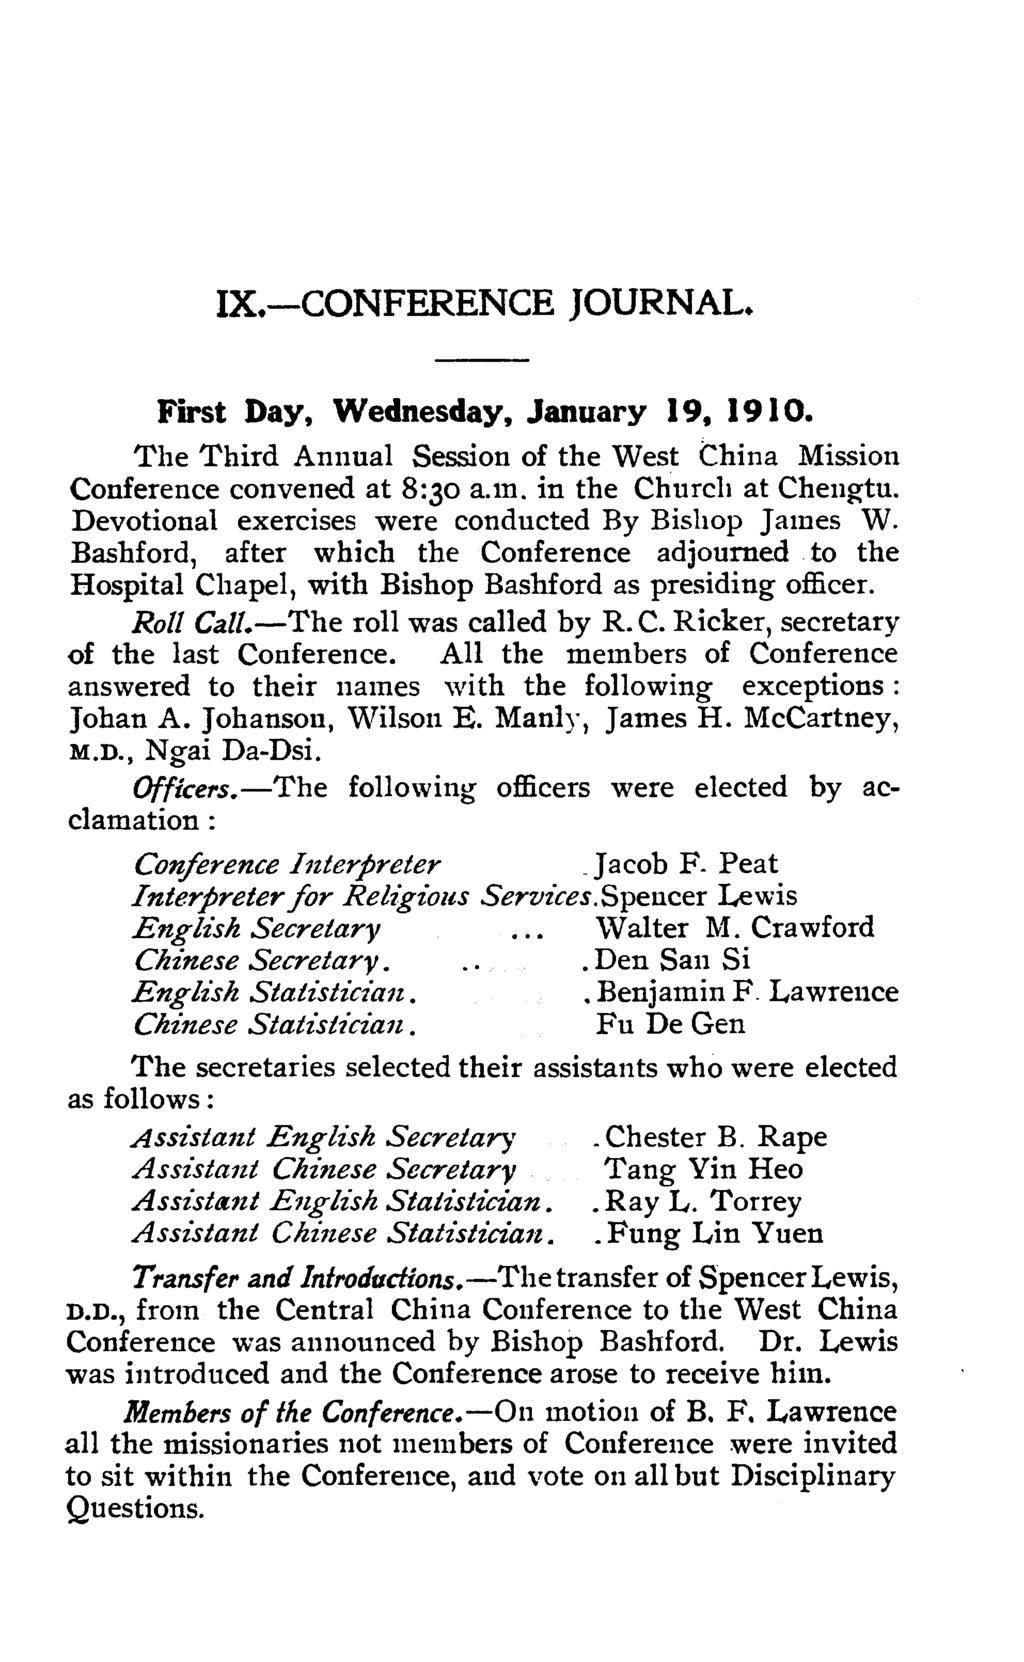 IX.-CONFERENCE JOURNAL. First Day, Wednesday, January 19, 1910. The Third Annual Session of the West thina Mission Conference convened at 8:30 a.m. in the Church at Chengtu.